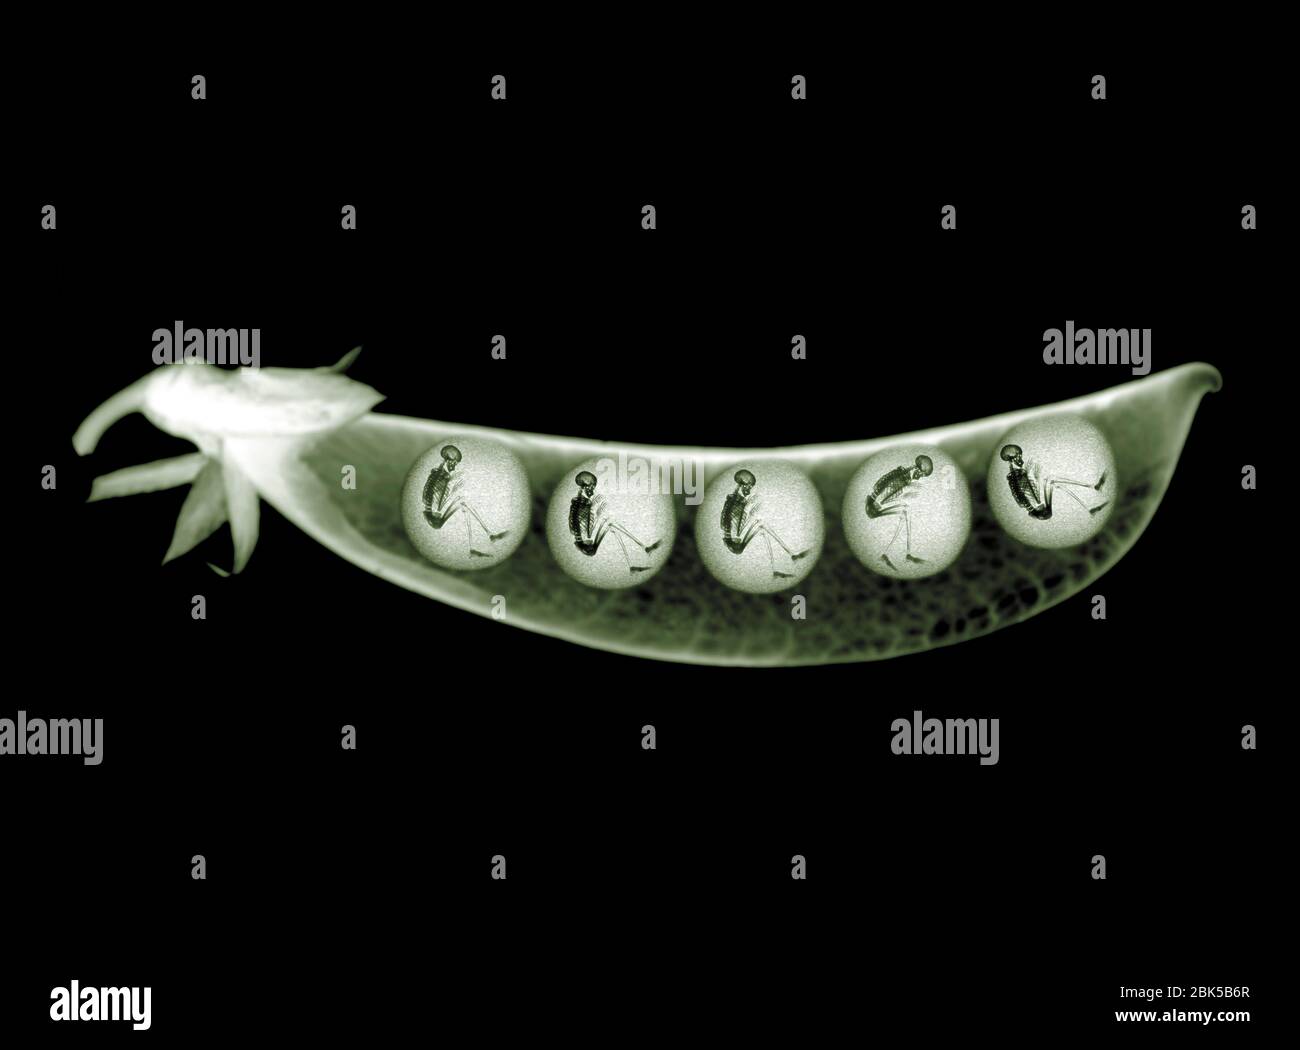 Peas in a pod with skeletons, X-ray. Stock Photo